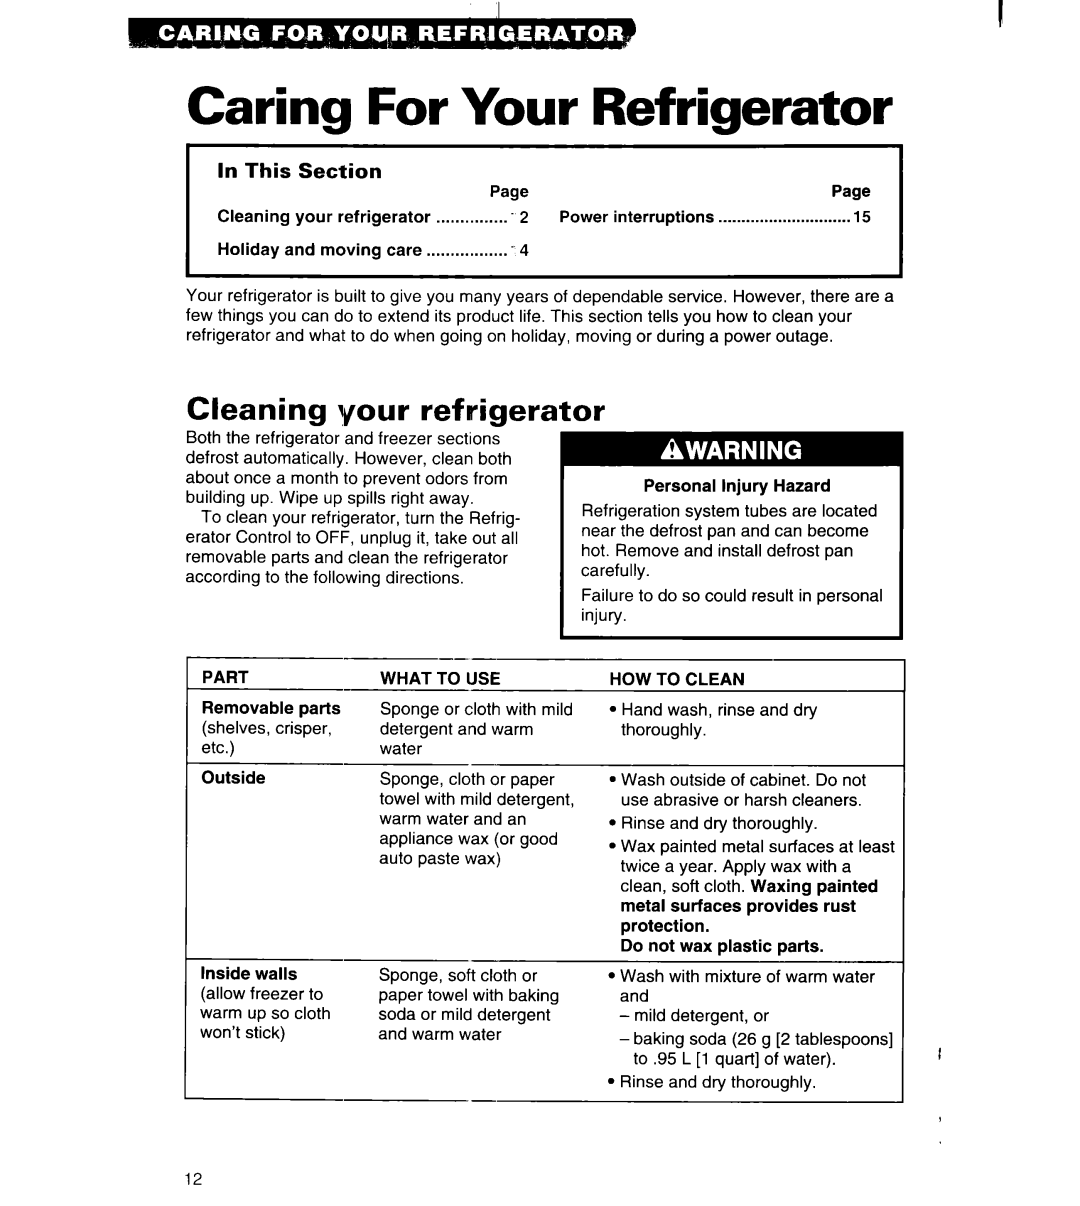 Whirlpool 3VET16GK important safety instructions Caring For Your Refrigerator, Cleaning your refrigerator, In This Section 